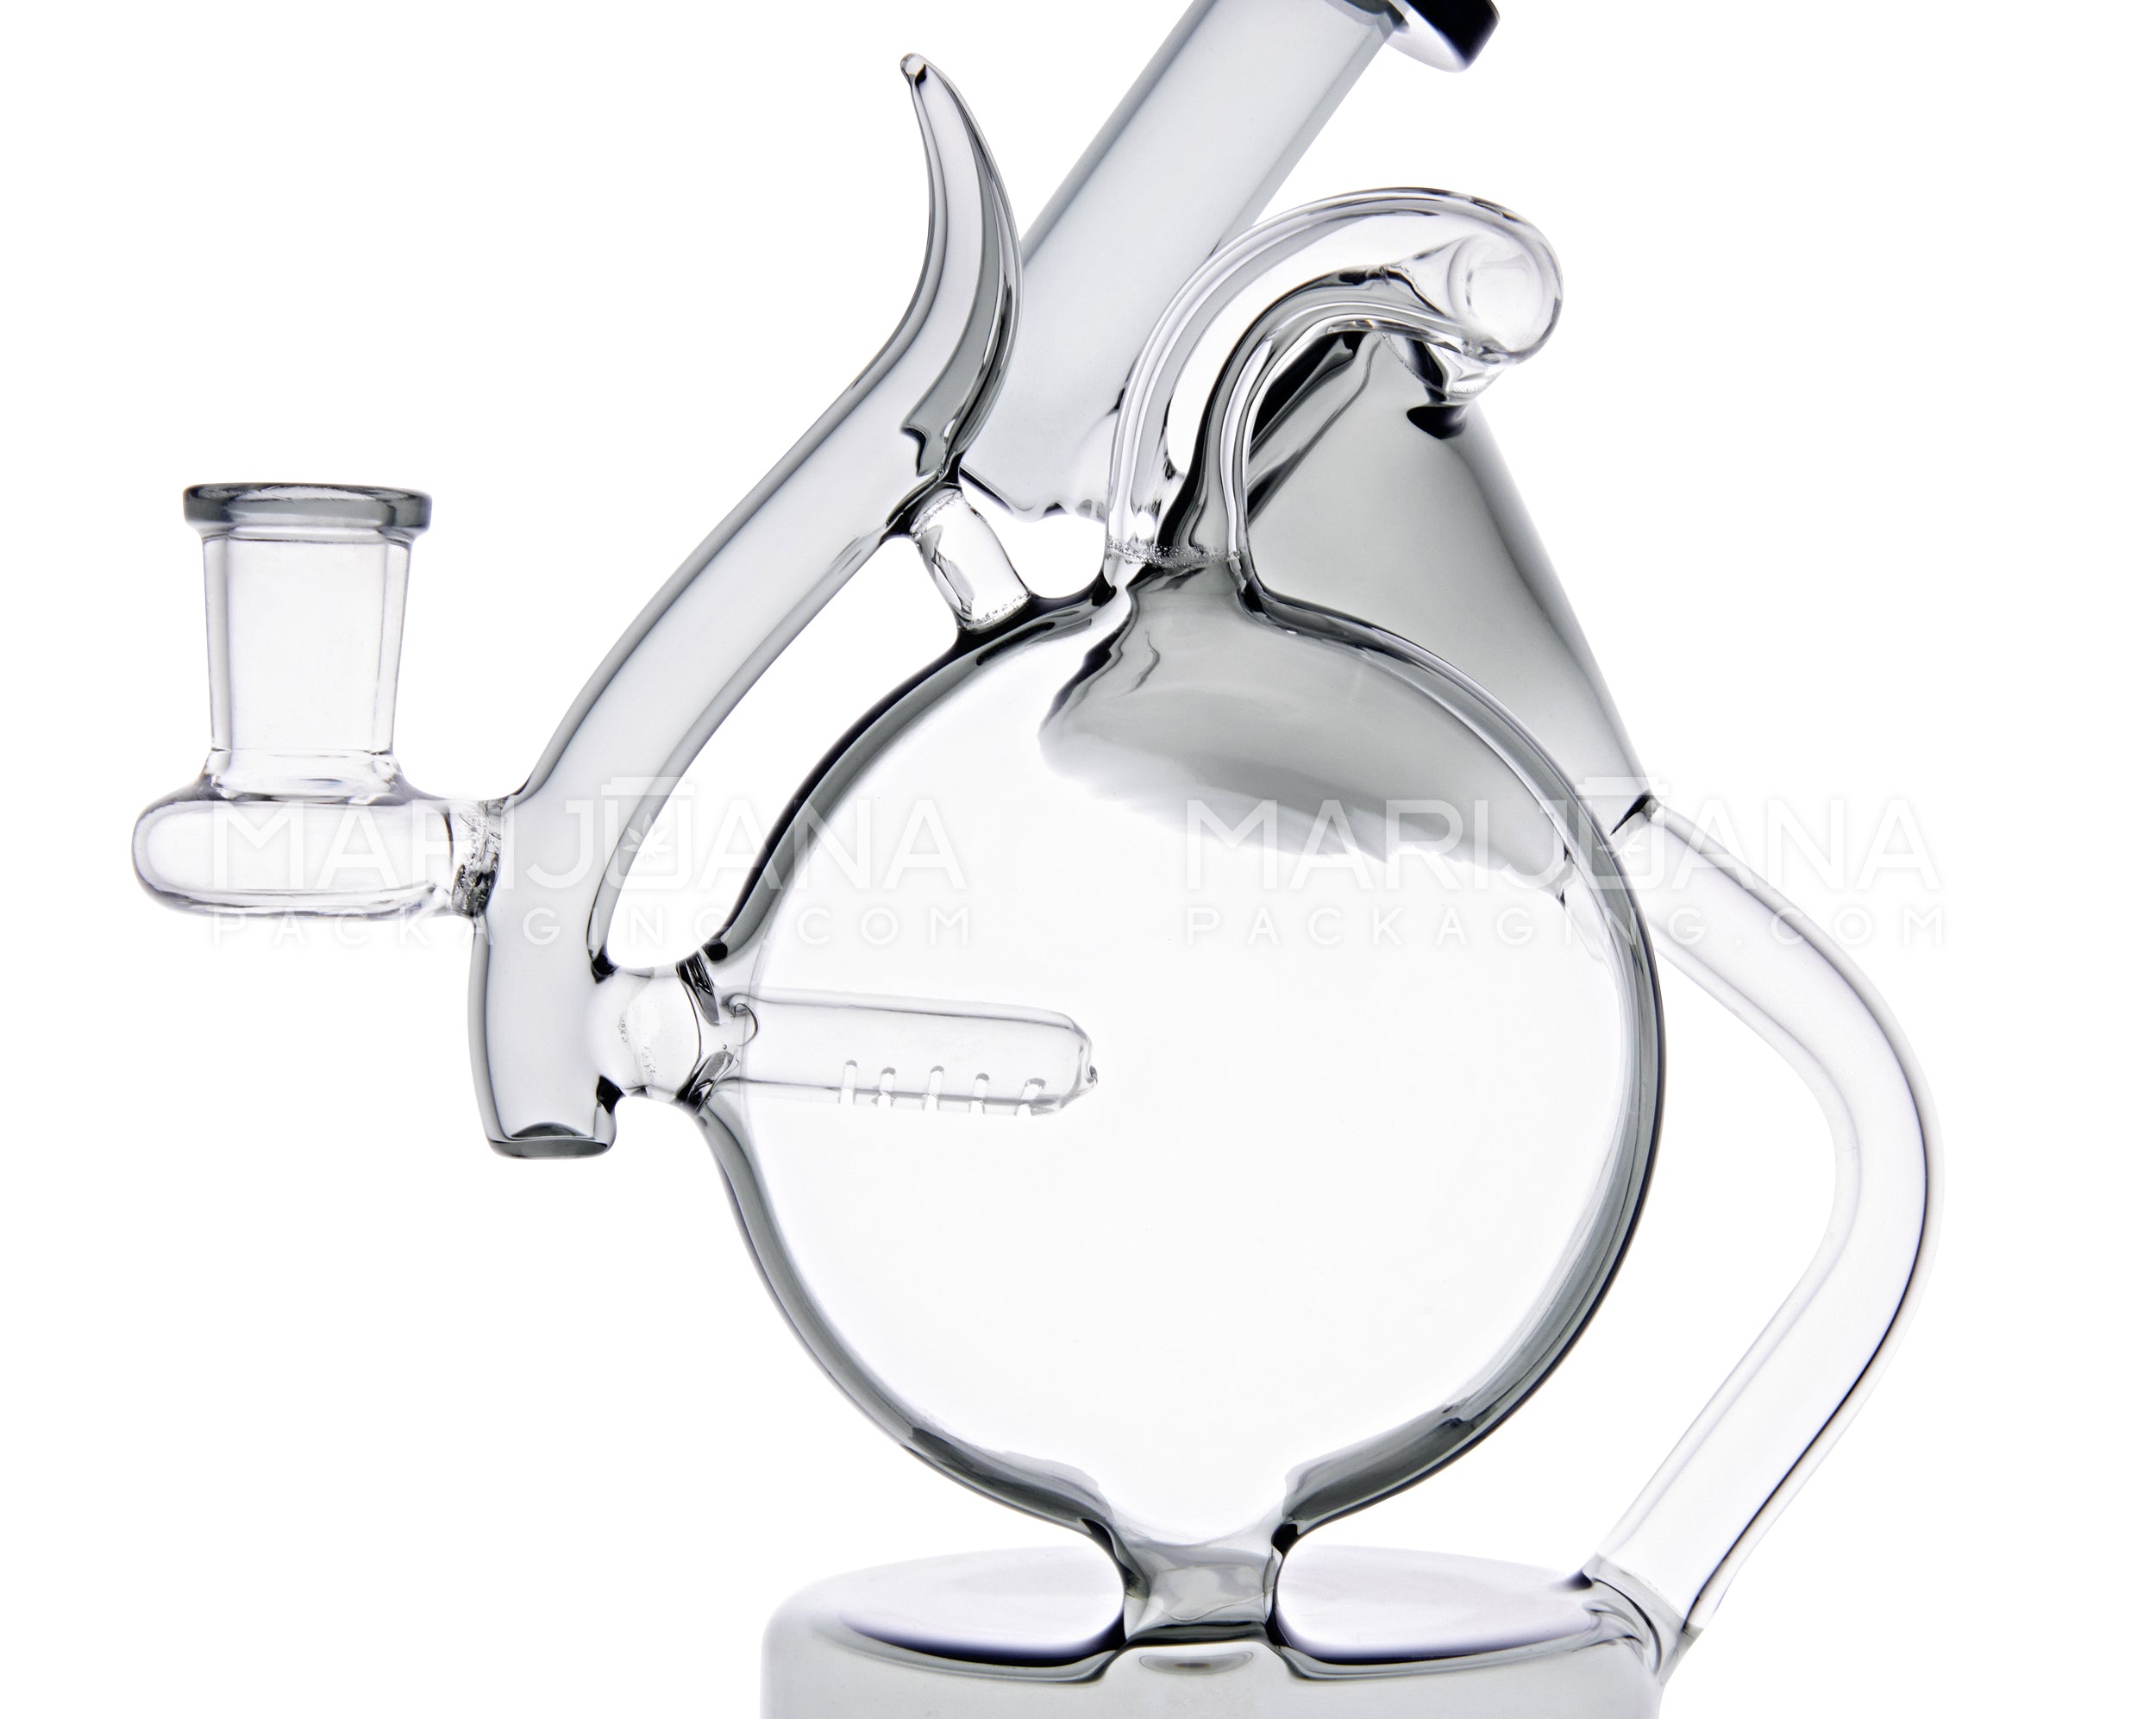 USA Glass | Angled Neck Inline Dual Chamber Recycler Water Pipe | 8in Tall - 14mm Bowl - Smoke